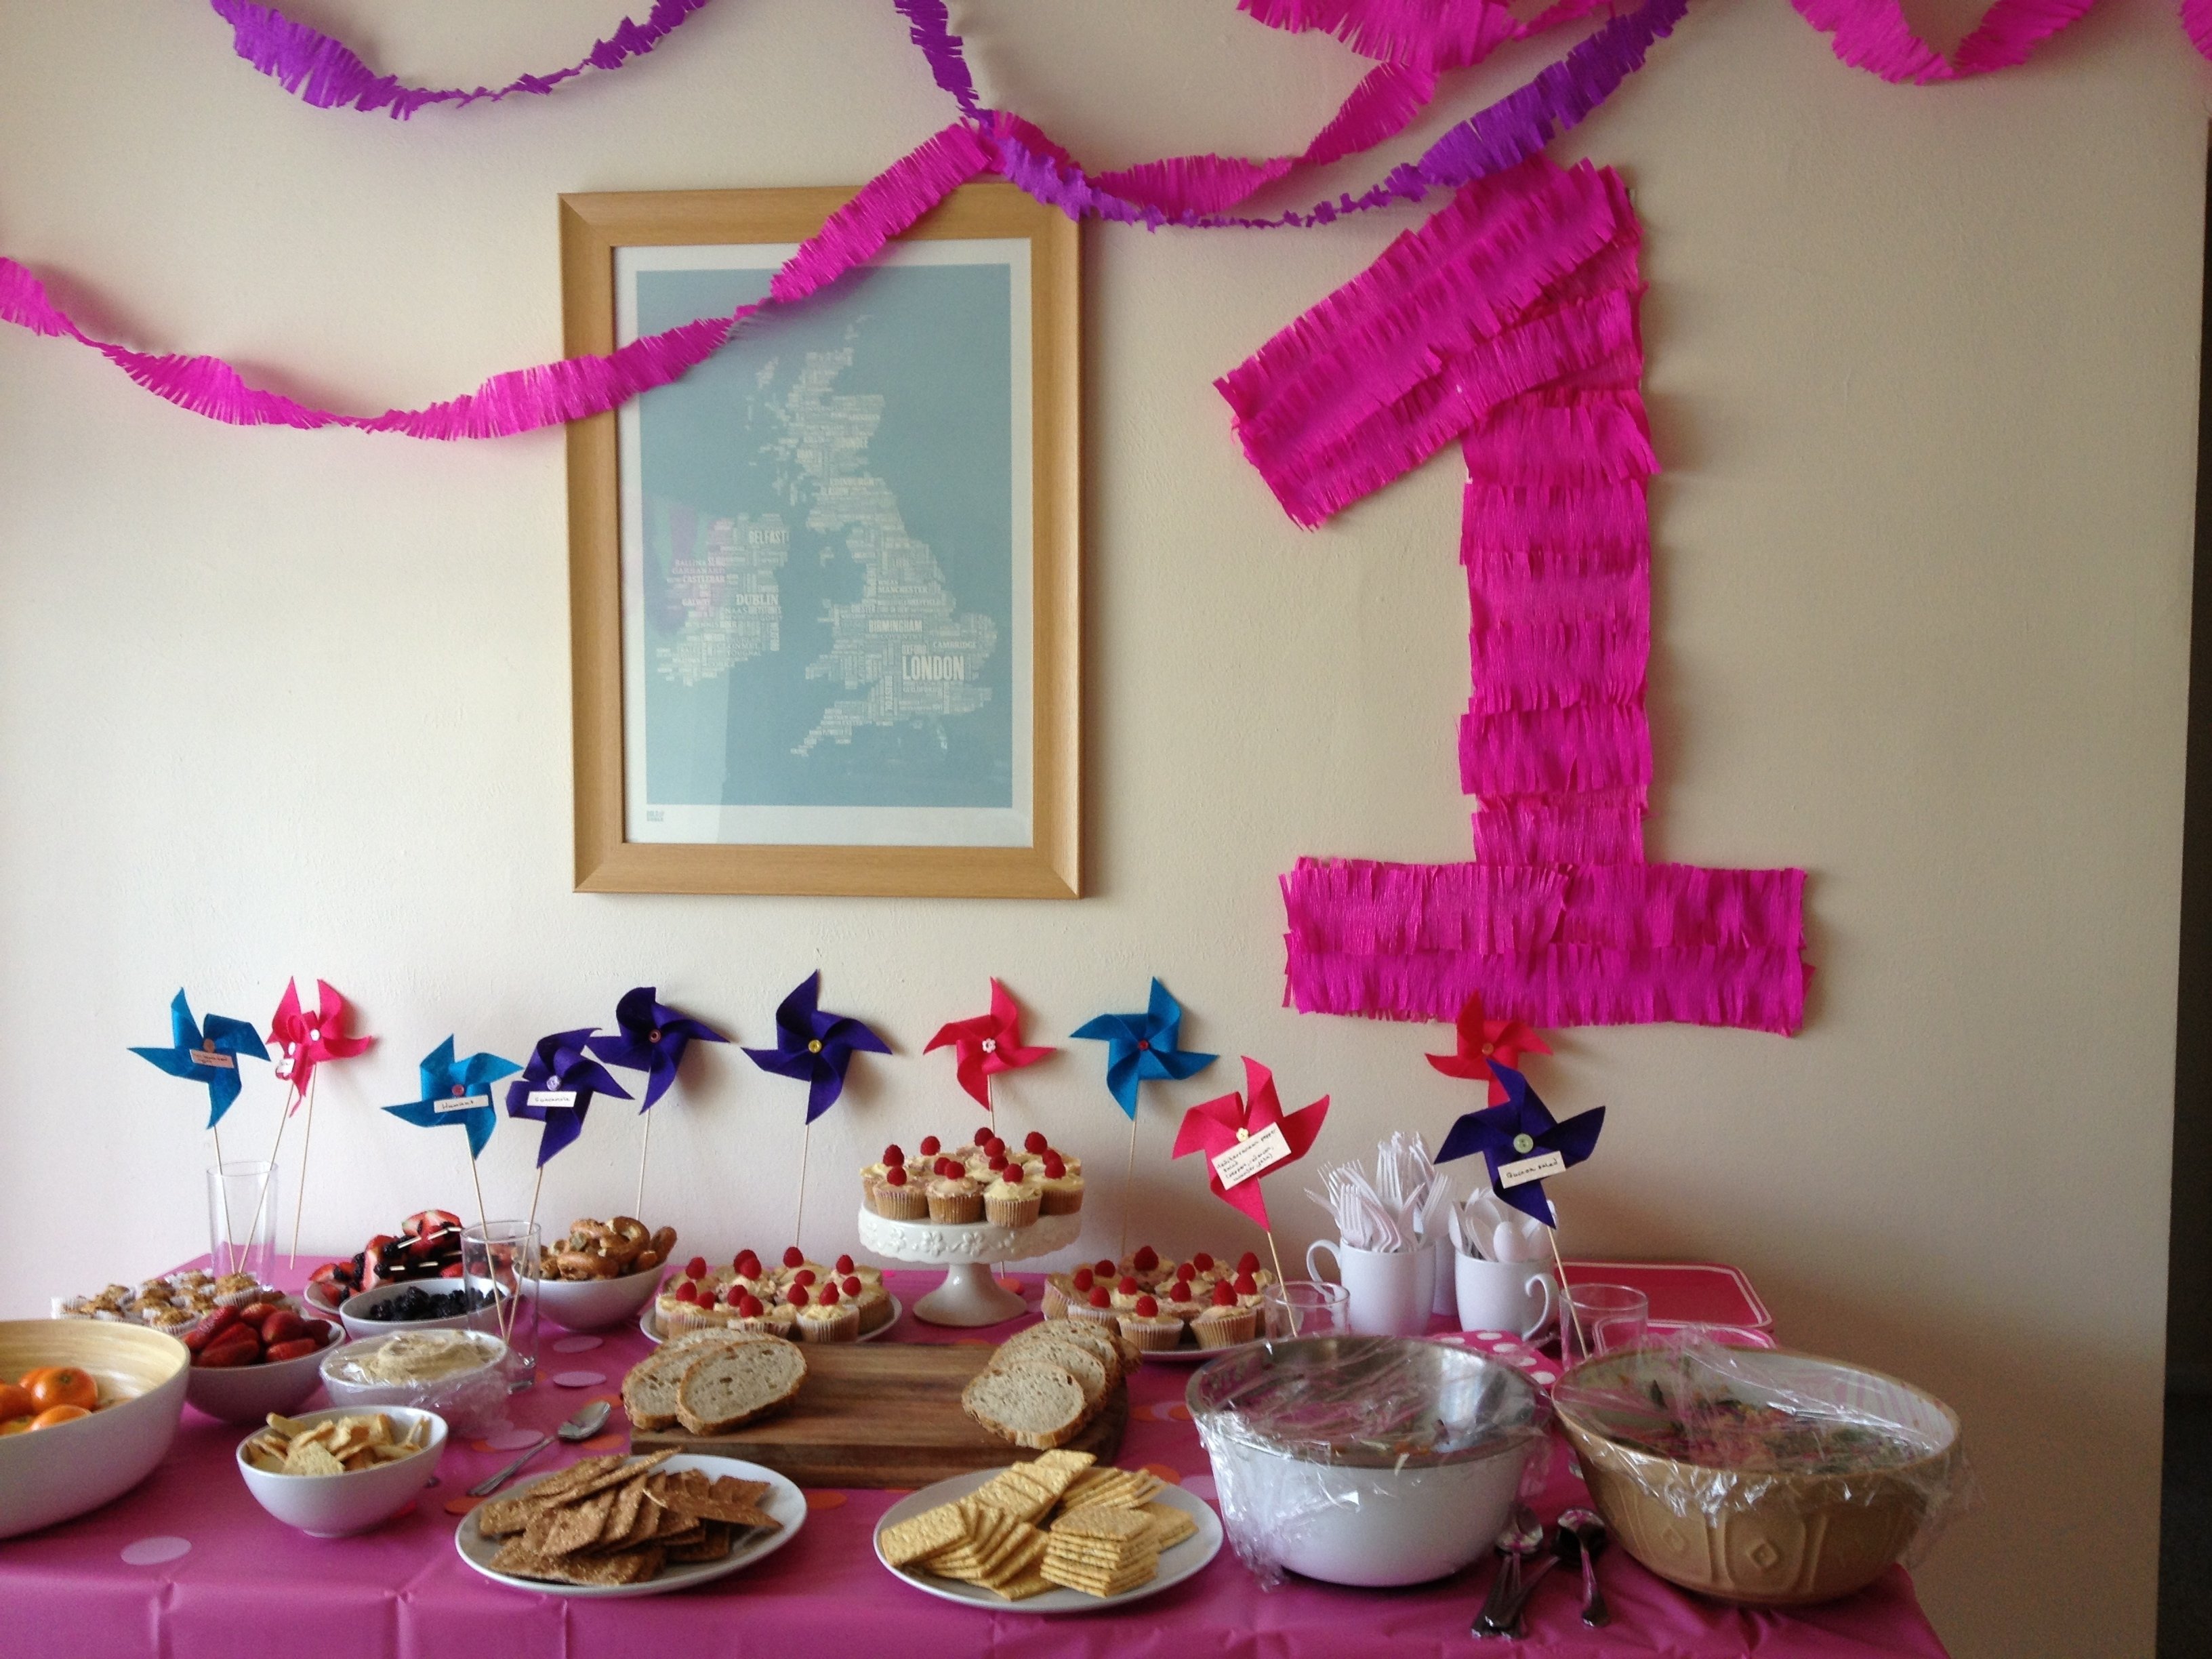 10 Attractive At Home Birthday Party Ideas wondrous ideas birthday party decorations at home the most elegant decoration for comfortable unique 2022